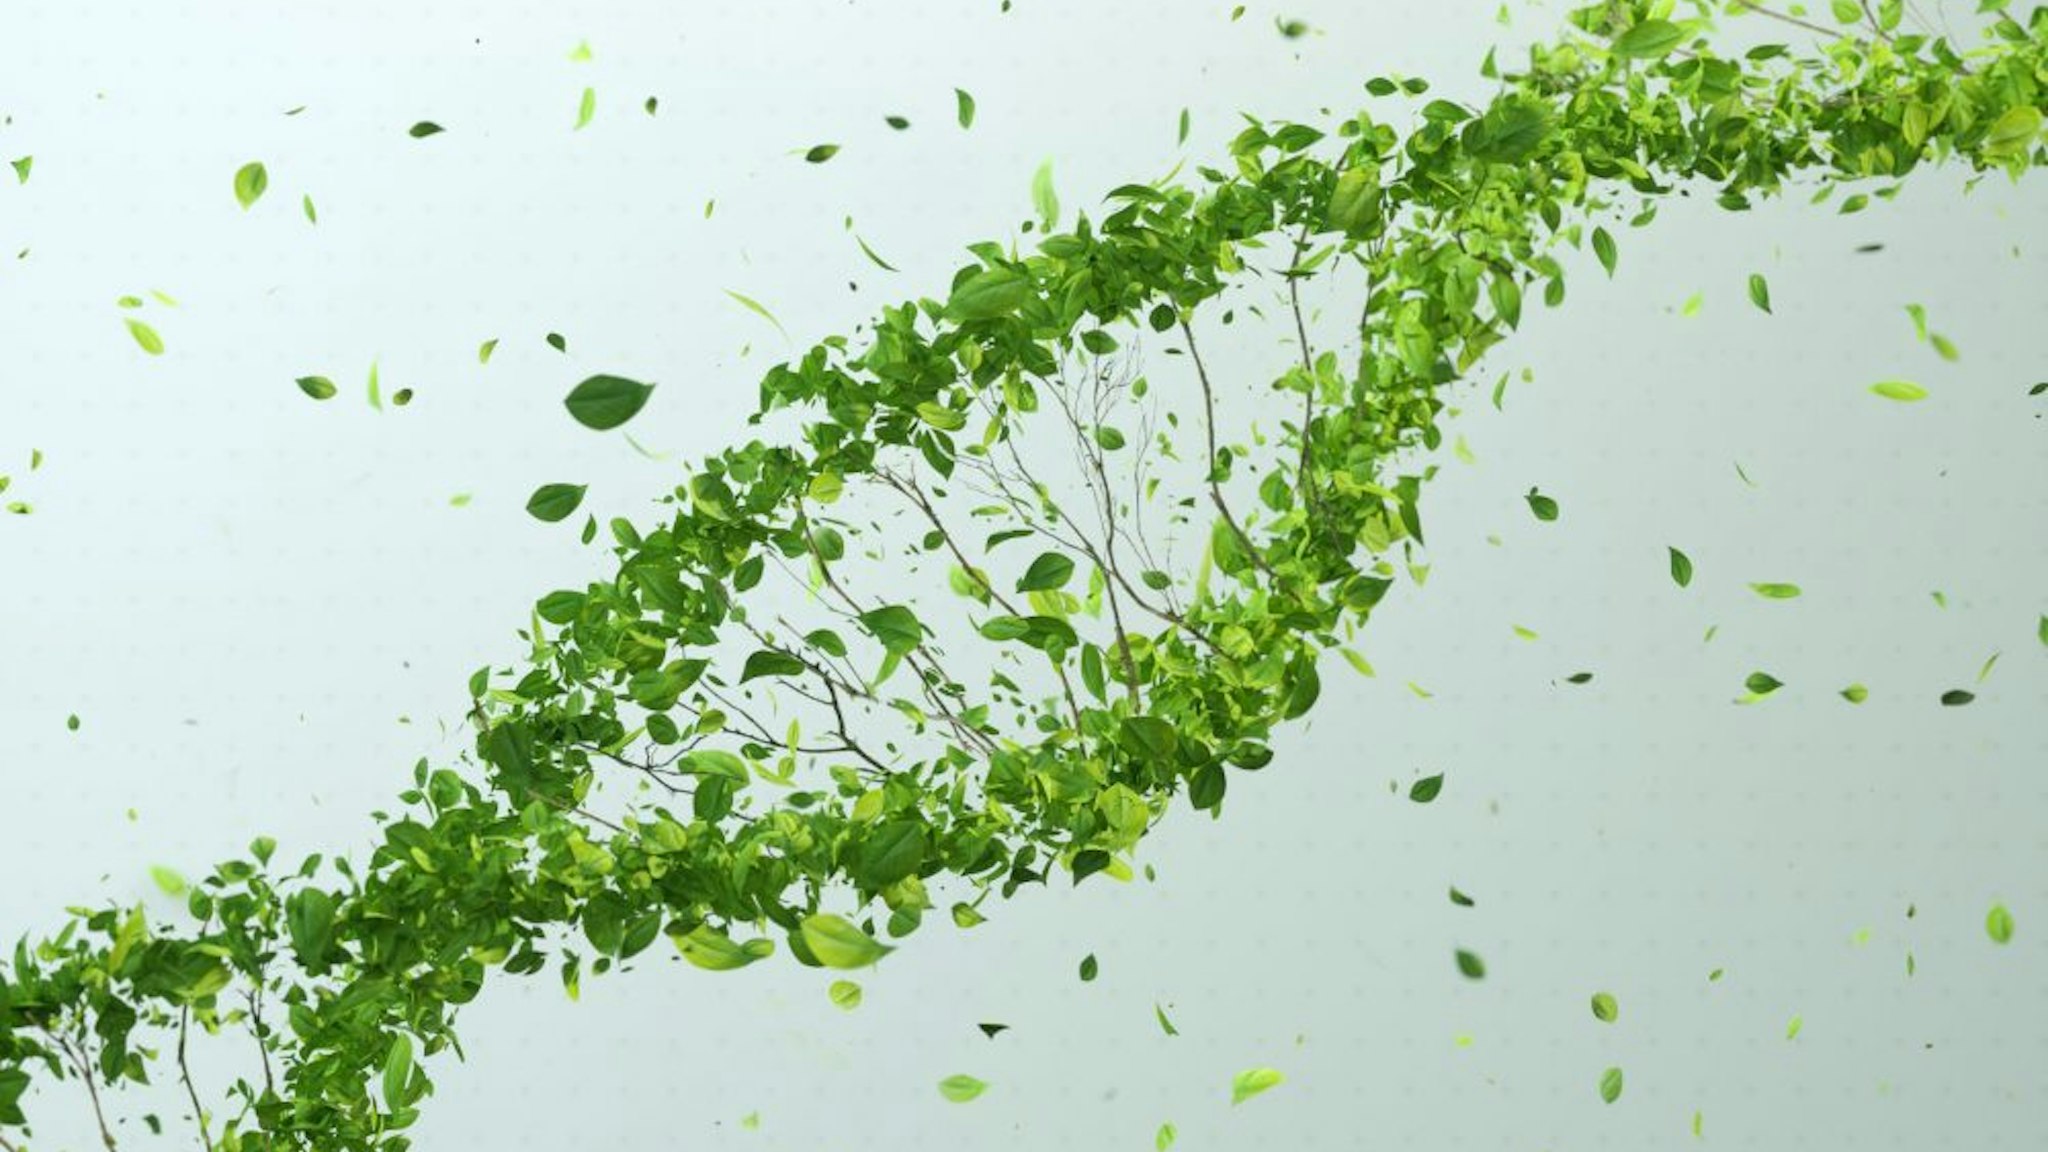 Digital generated image of DNA made out of green leaves on grey background